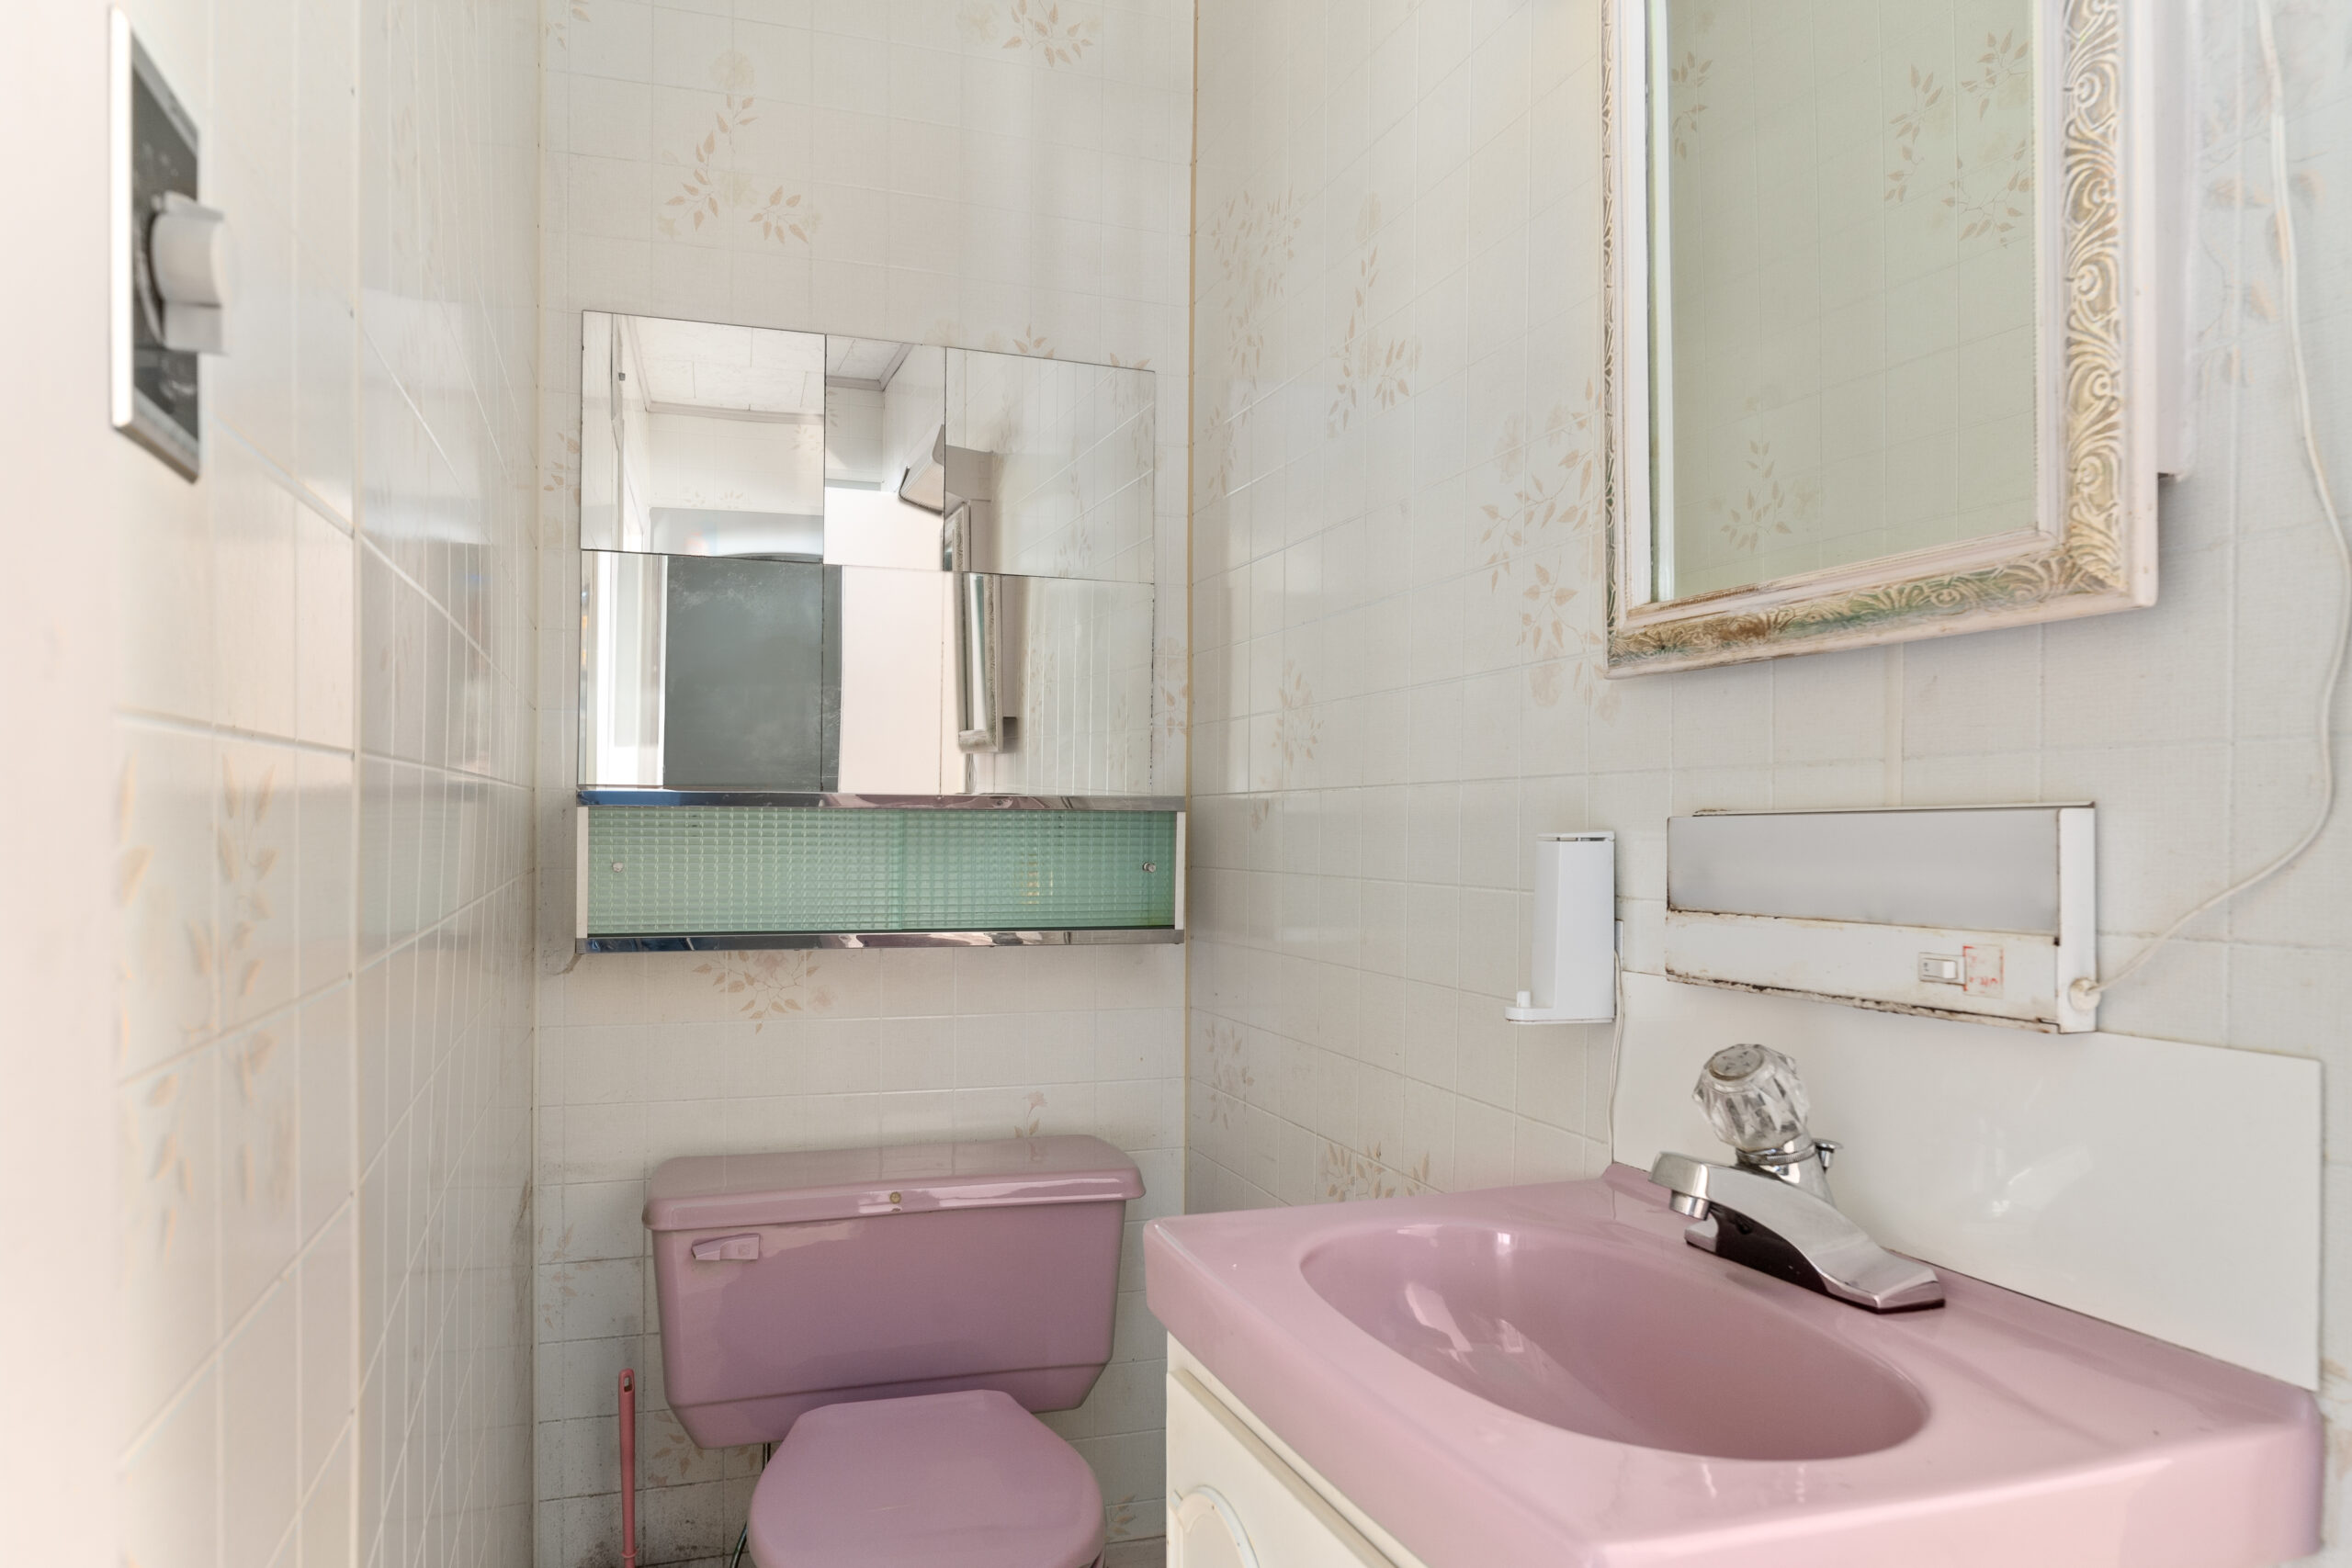 A small bathroom with a pink toilet and sink.